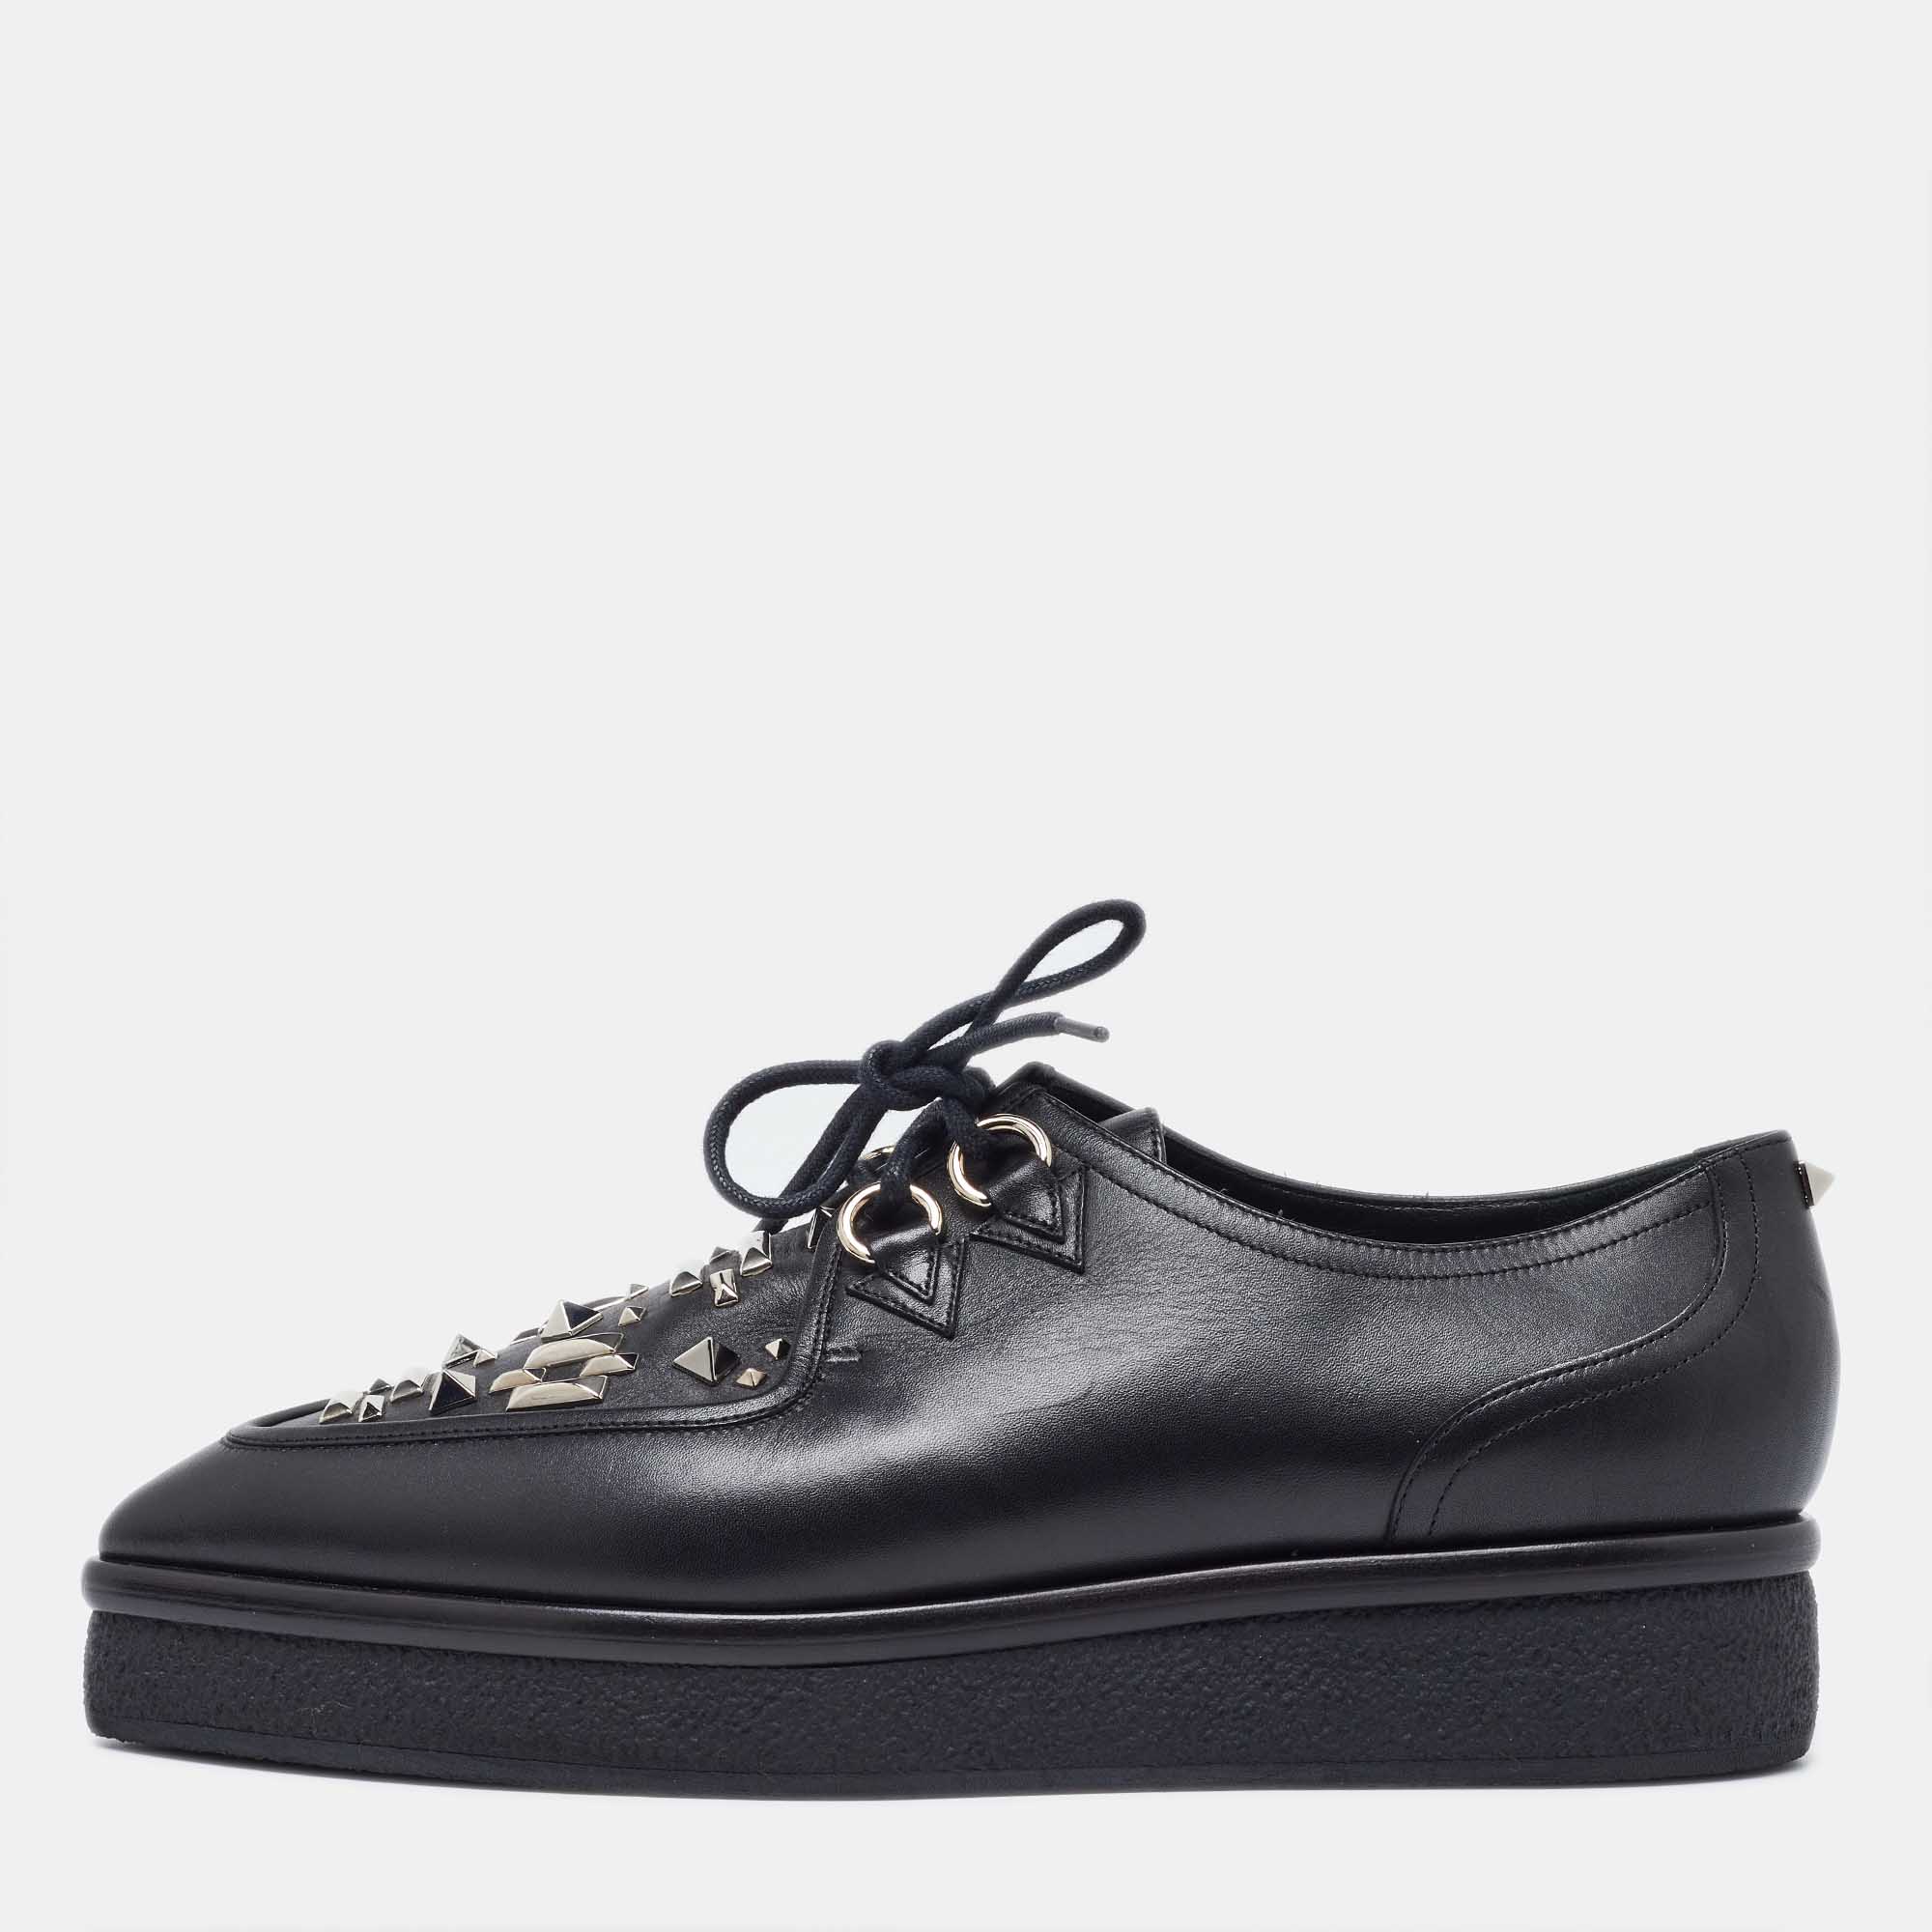 Valentino black leather studded lace up flat sneakers size 37.5